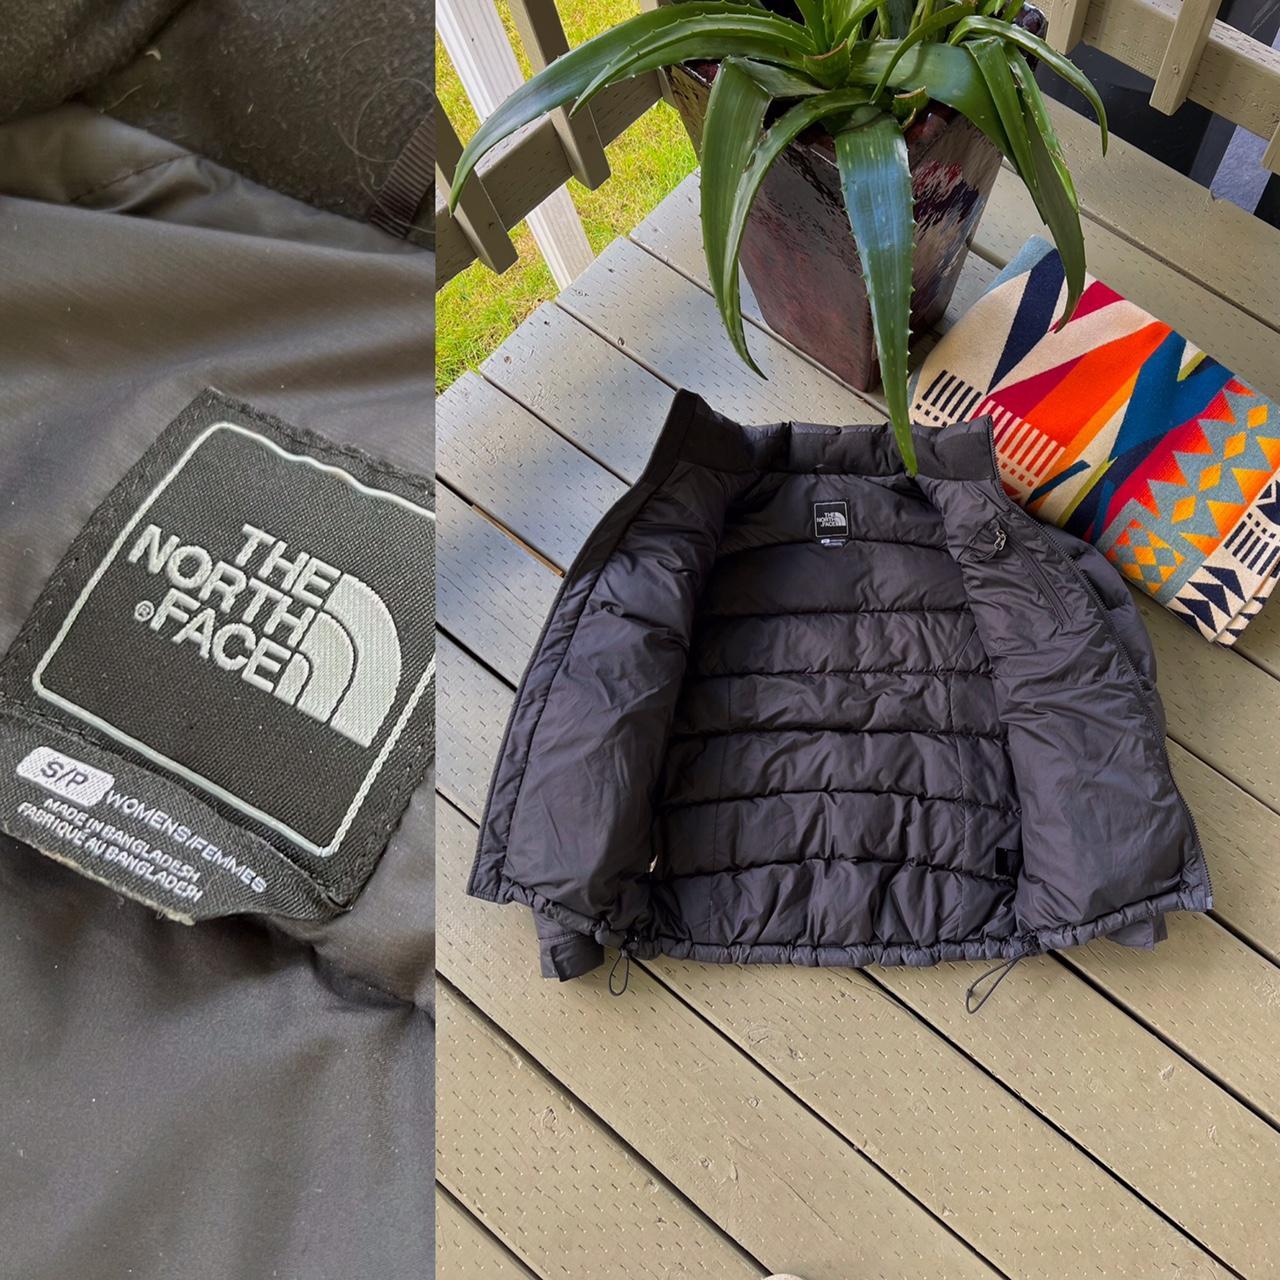 Product Image 4 - black north face puffer 700

North